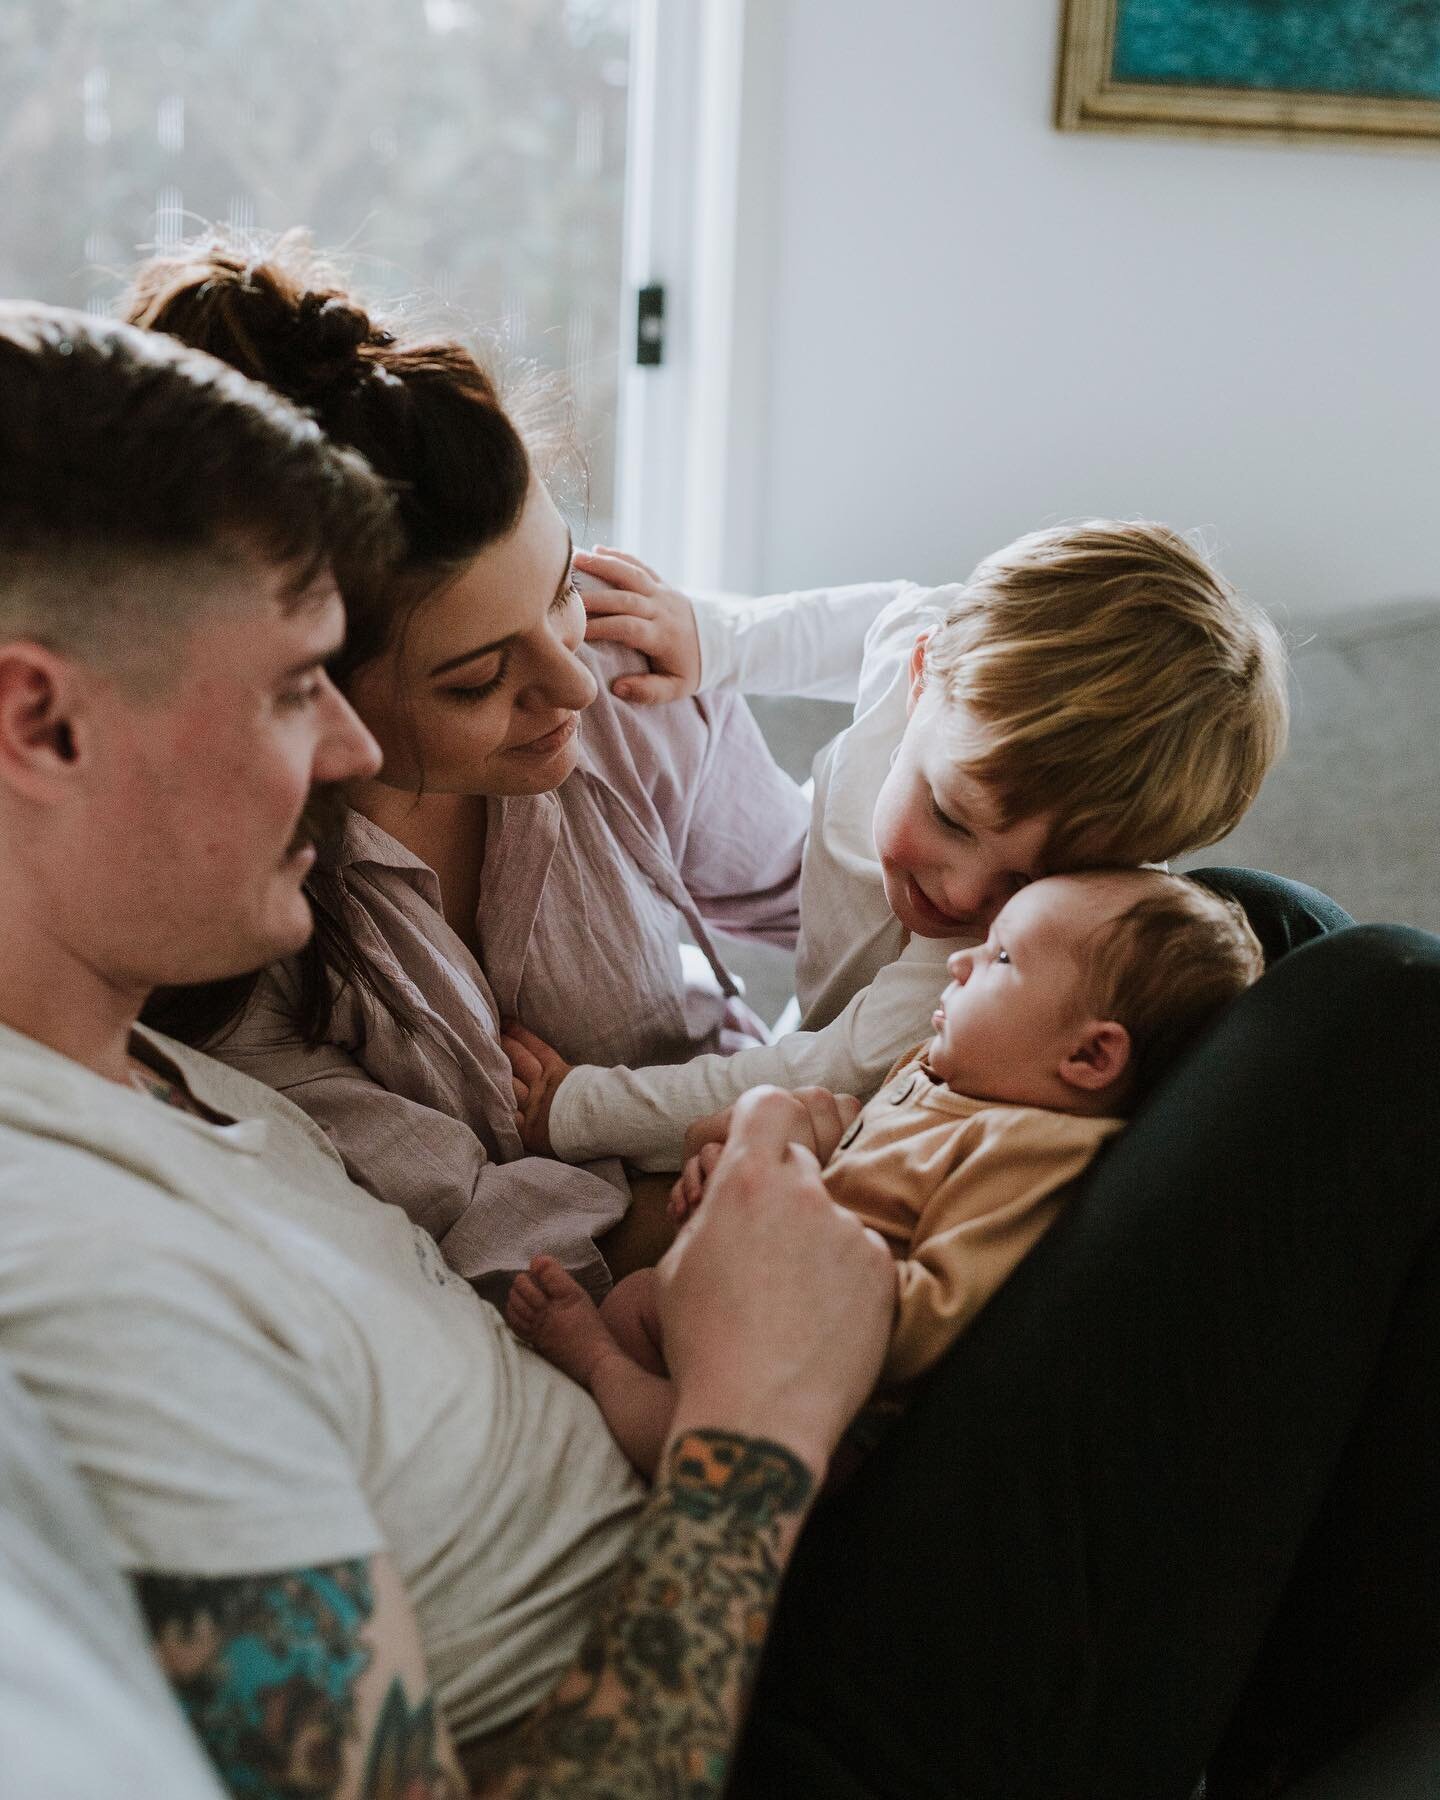 Our little fam 🖤 my heart explodes with gratitude when I look at my two darling babies. Rowan is such a sweet big brother, he absolutely dotes on Maggie with affection! Thank you @natasha_maree_photography for capturing us and you best believe I wil